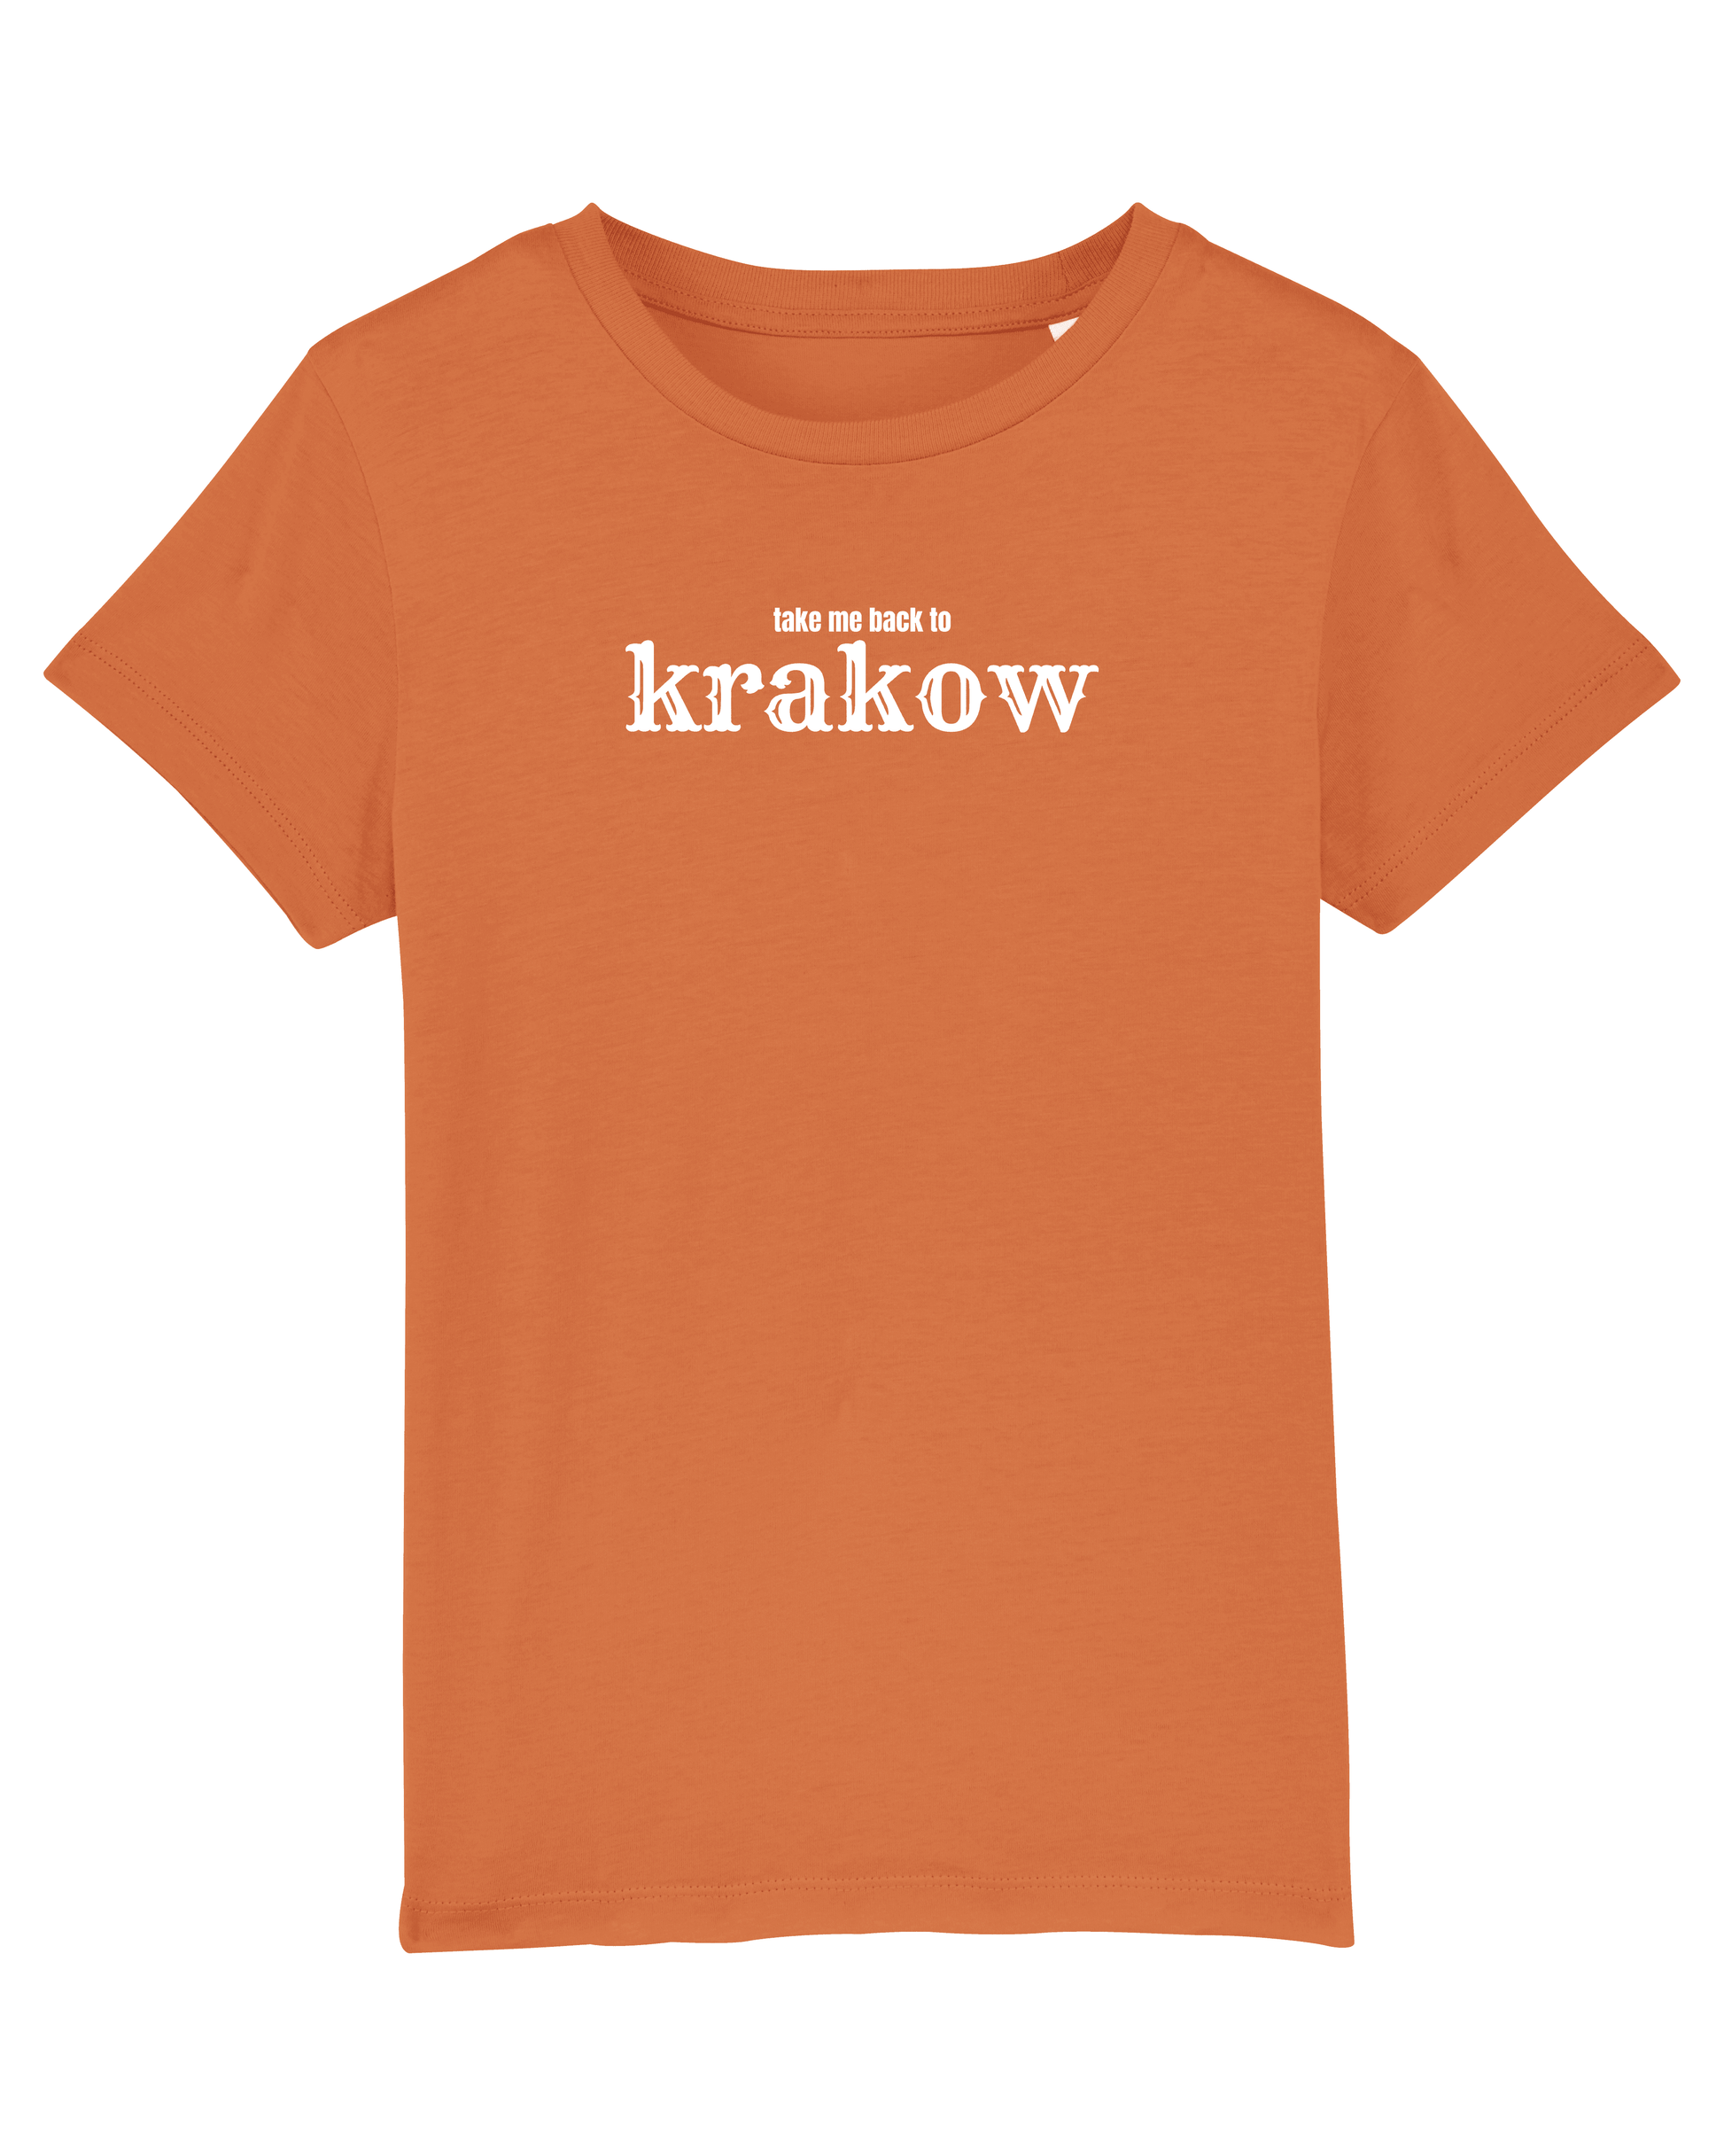 TAKE ME BACK TO KRAKOW - Toddler and Youth T-Shirt - Little Mate Adventures